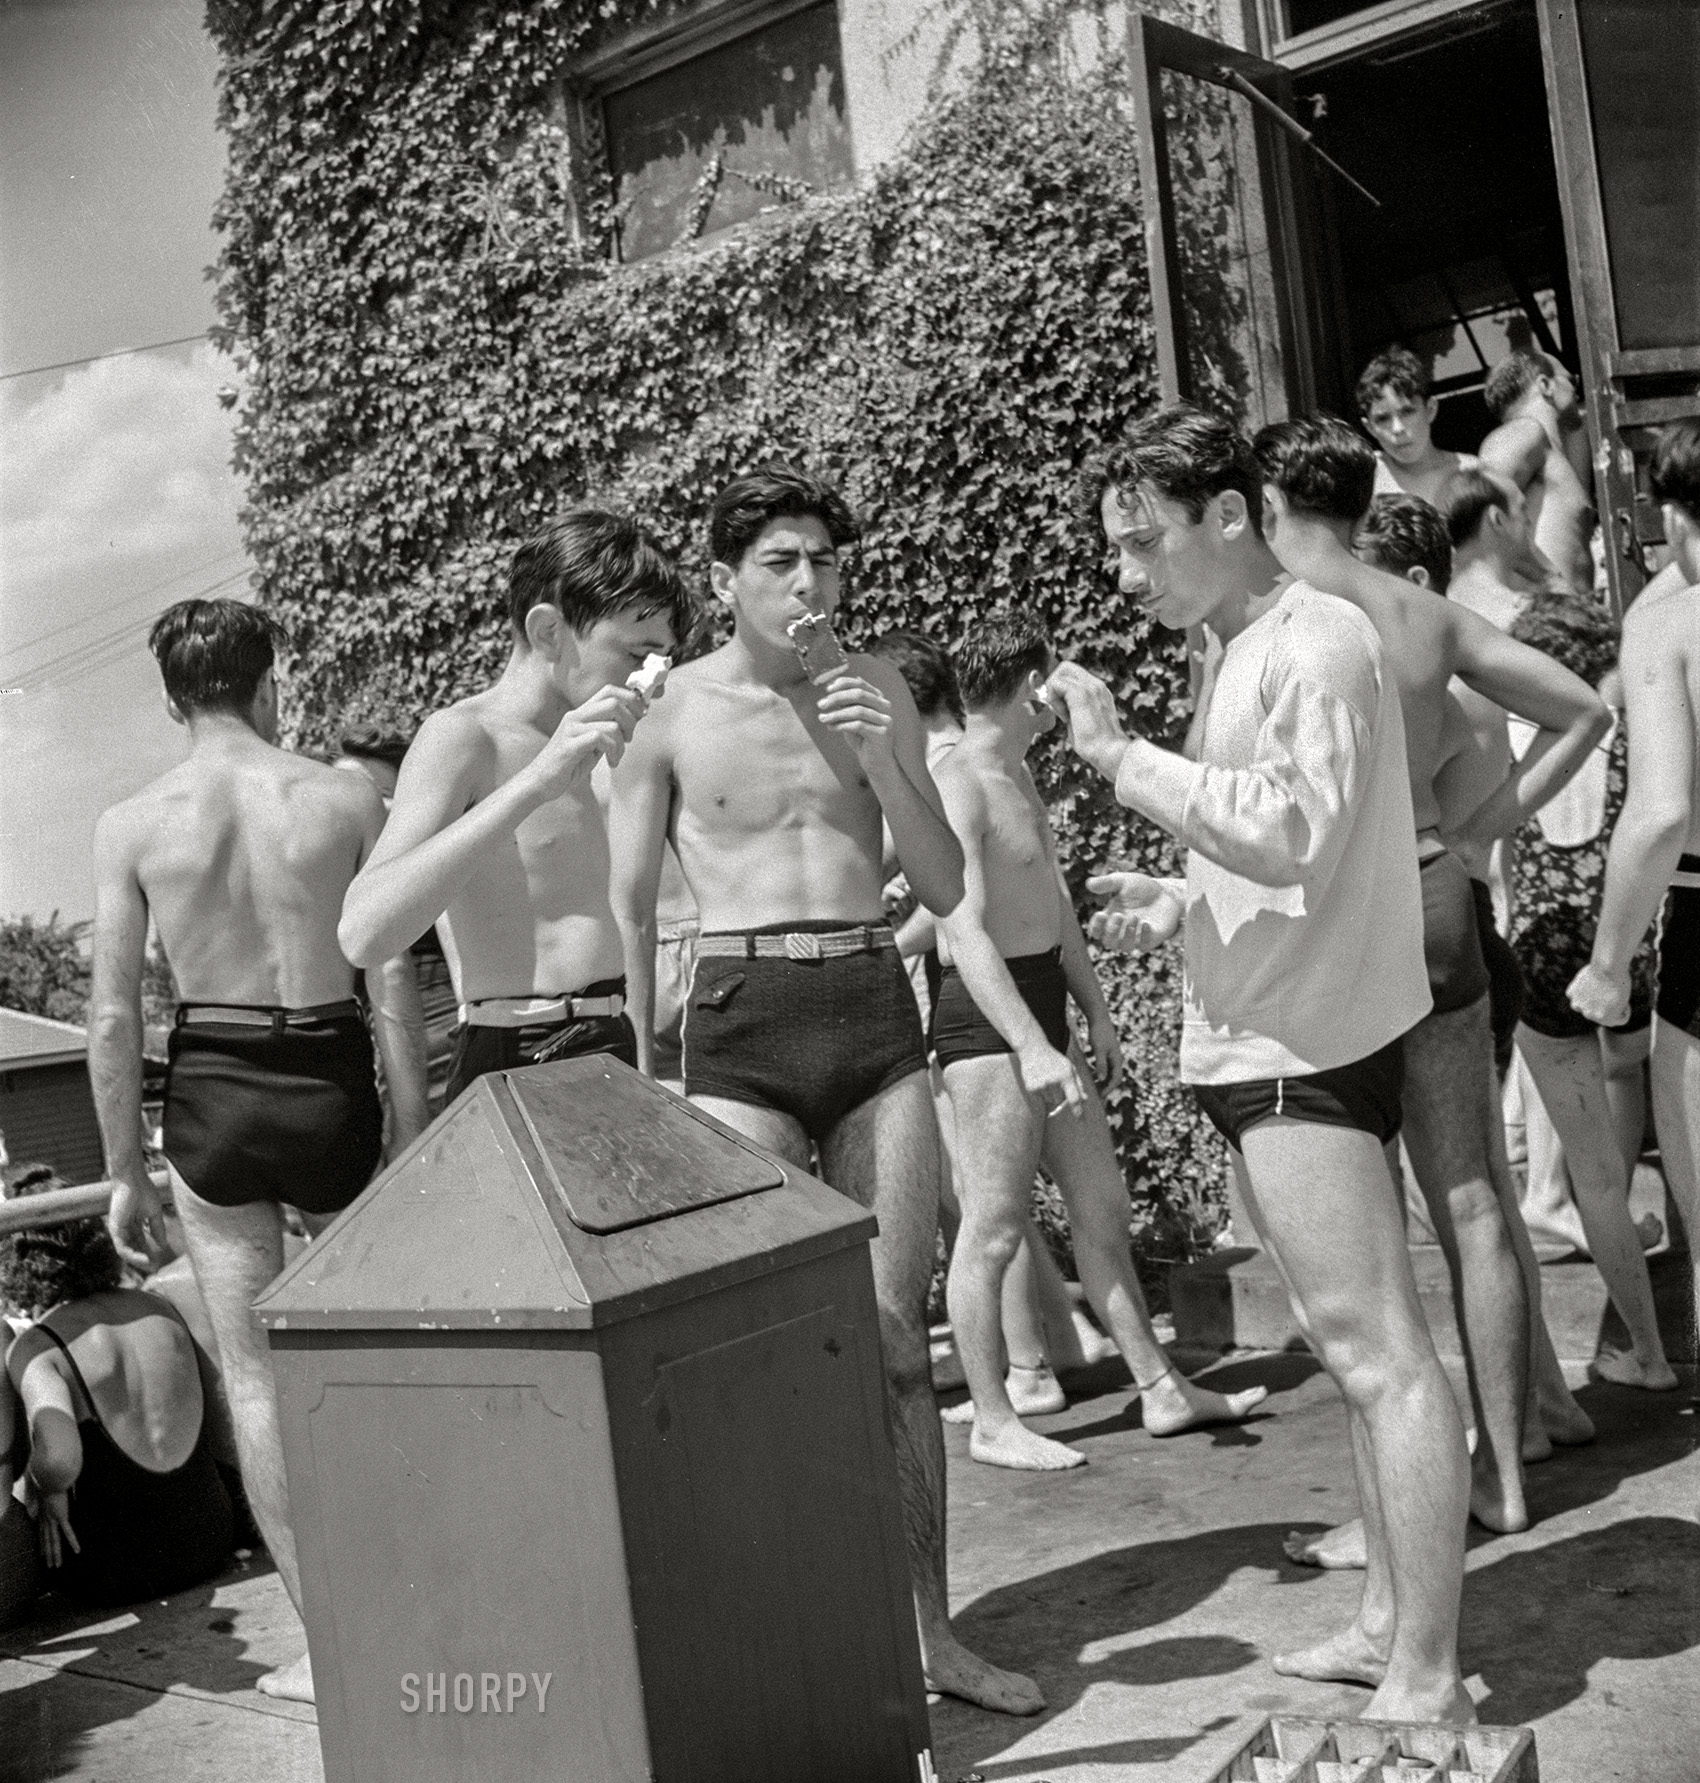 July 1942. Washington, D.C. "Sunday at the municipal swimming pool." Medium format nitrate negative by Marjory Collins for the Office of War Information. View full size.